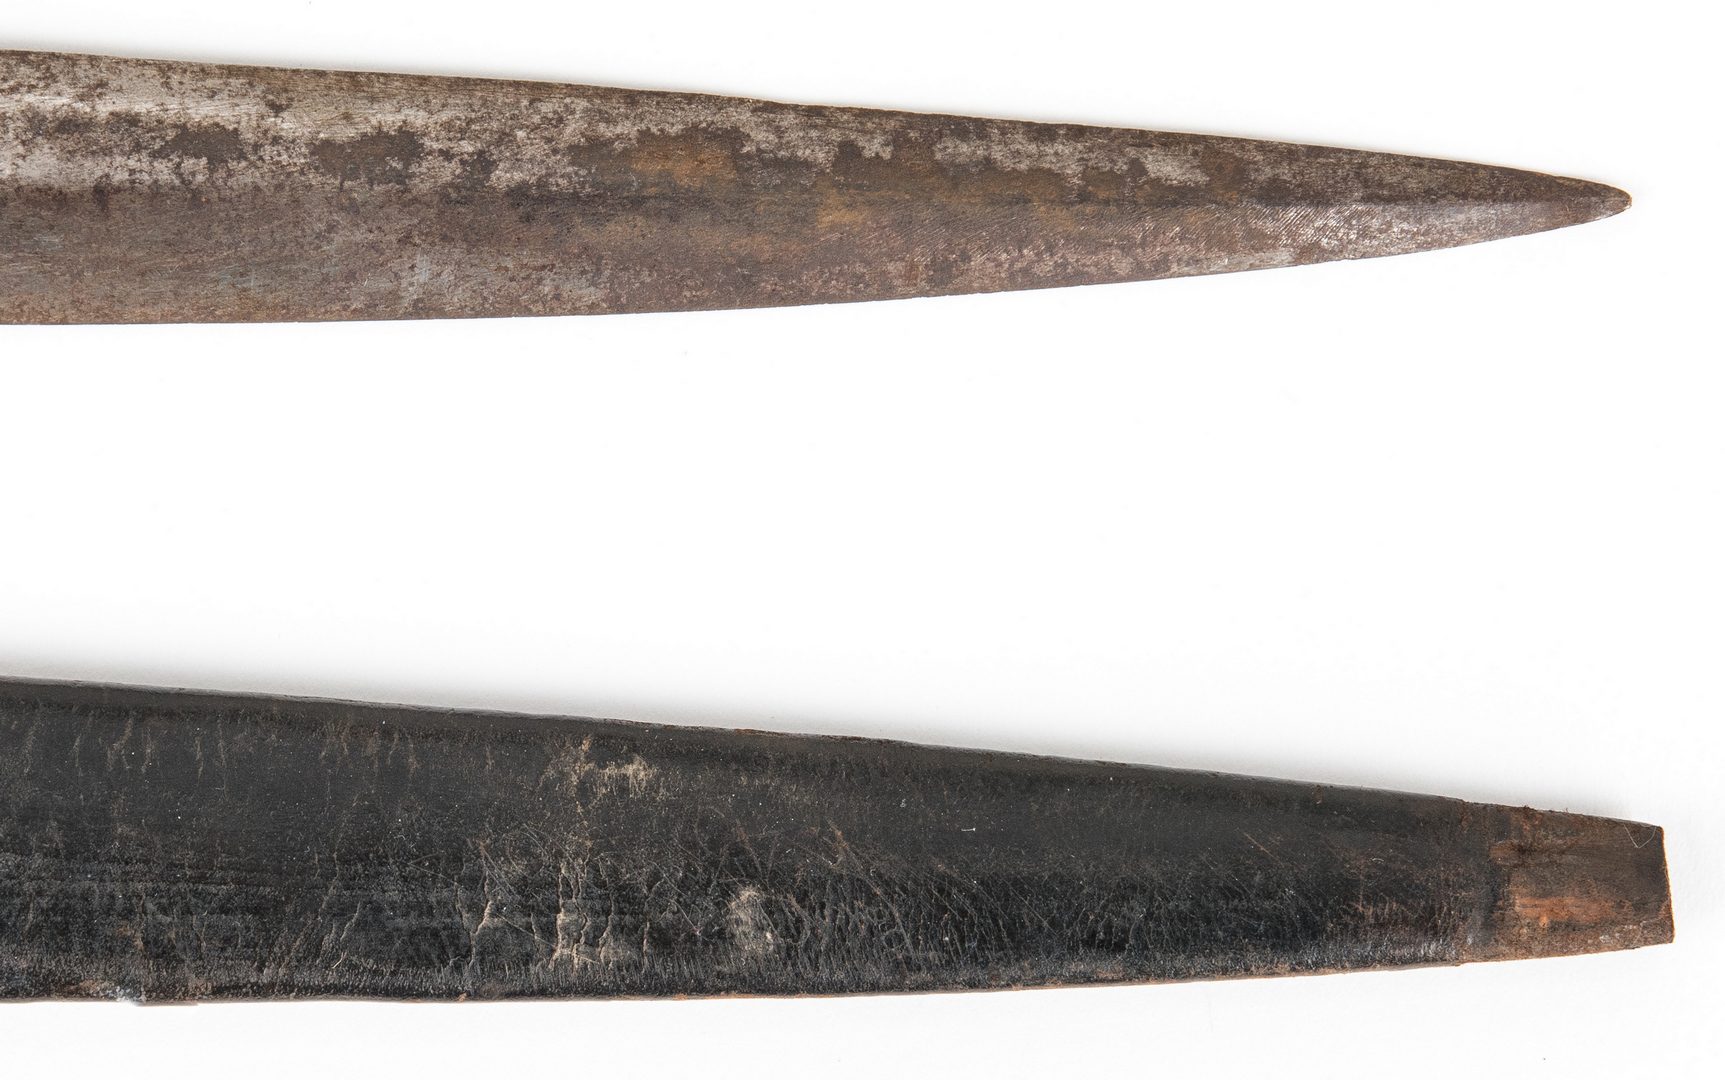 Lot 330: Confederate AR Calvary Toothpick Side Knife with Scabbard